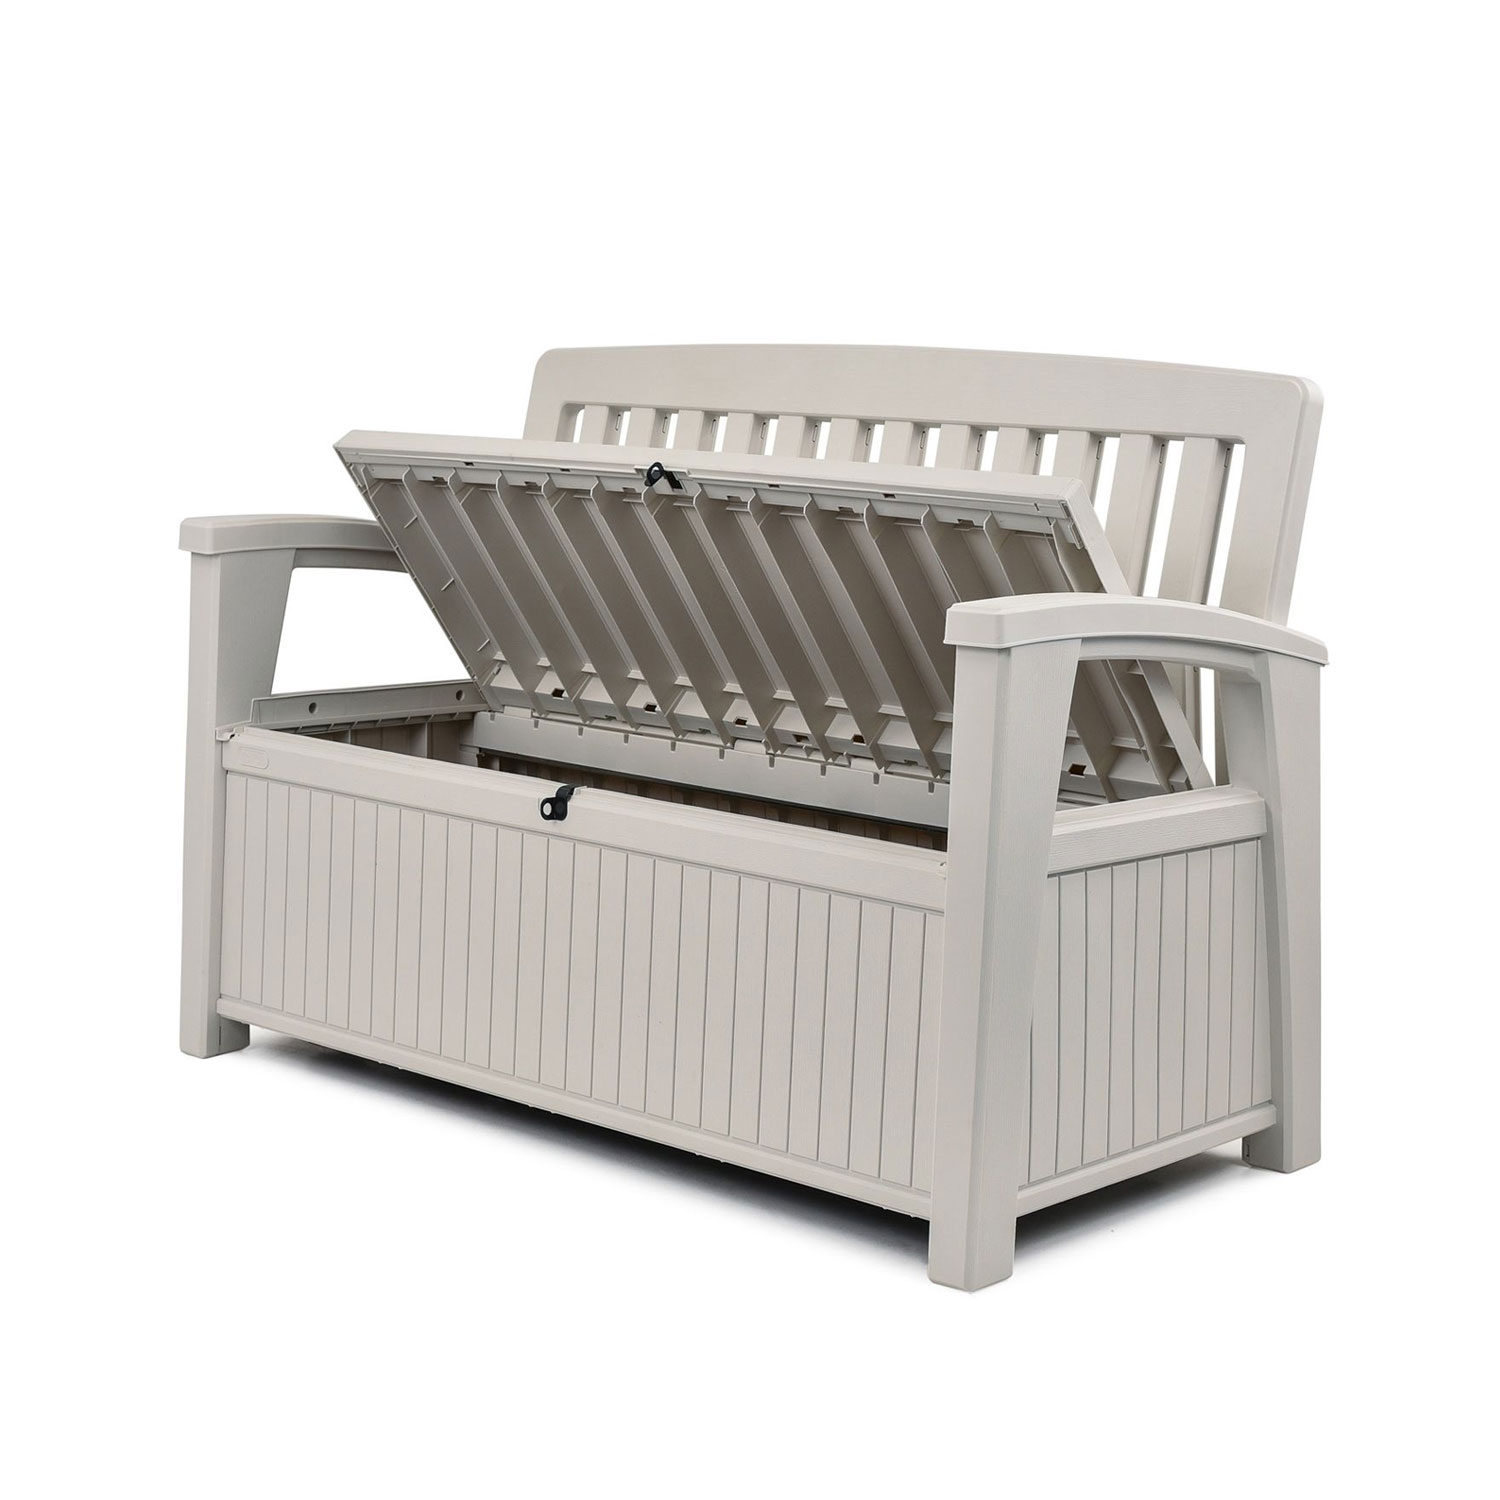 Keter 60 Gal Patio Storage Bench Tool Box For Patio And Garden Ivory